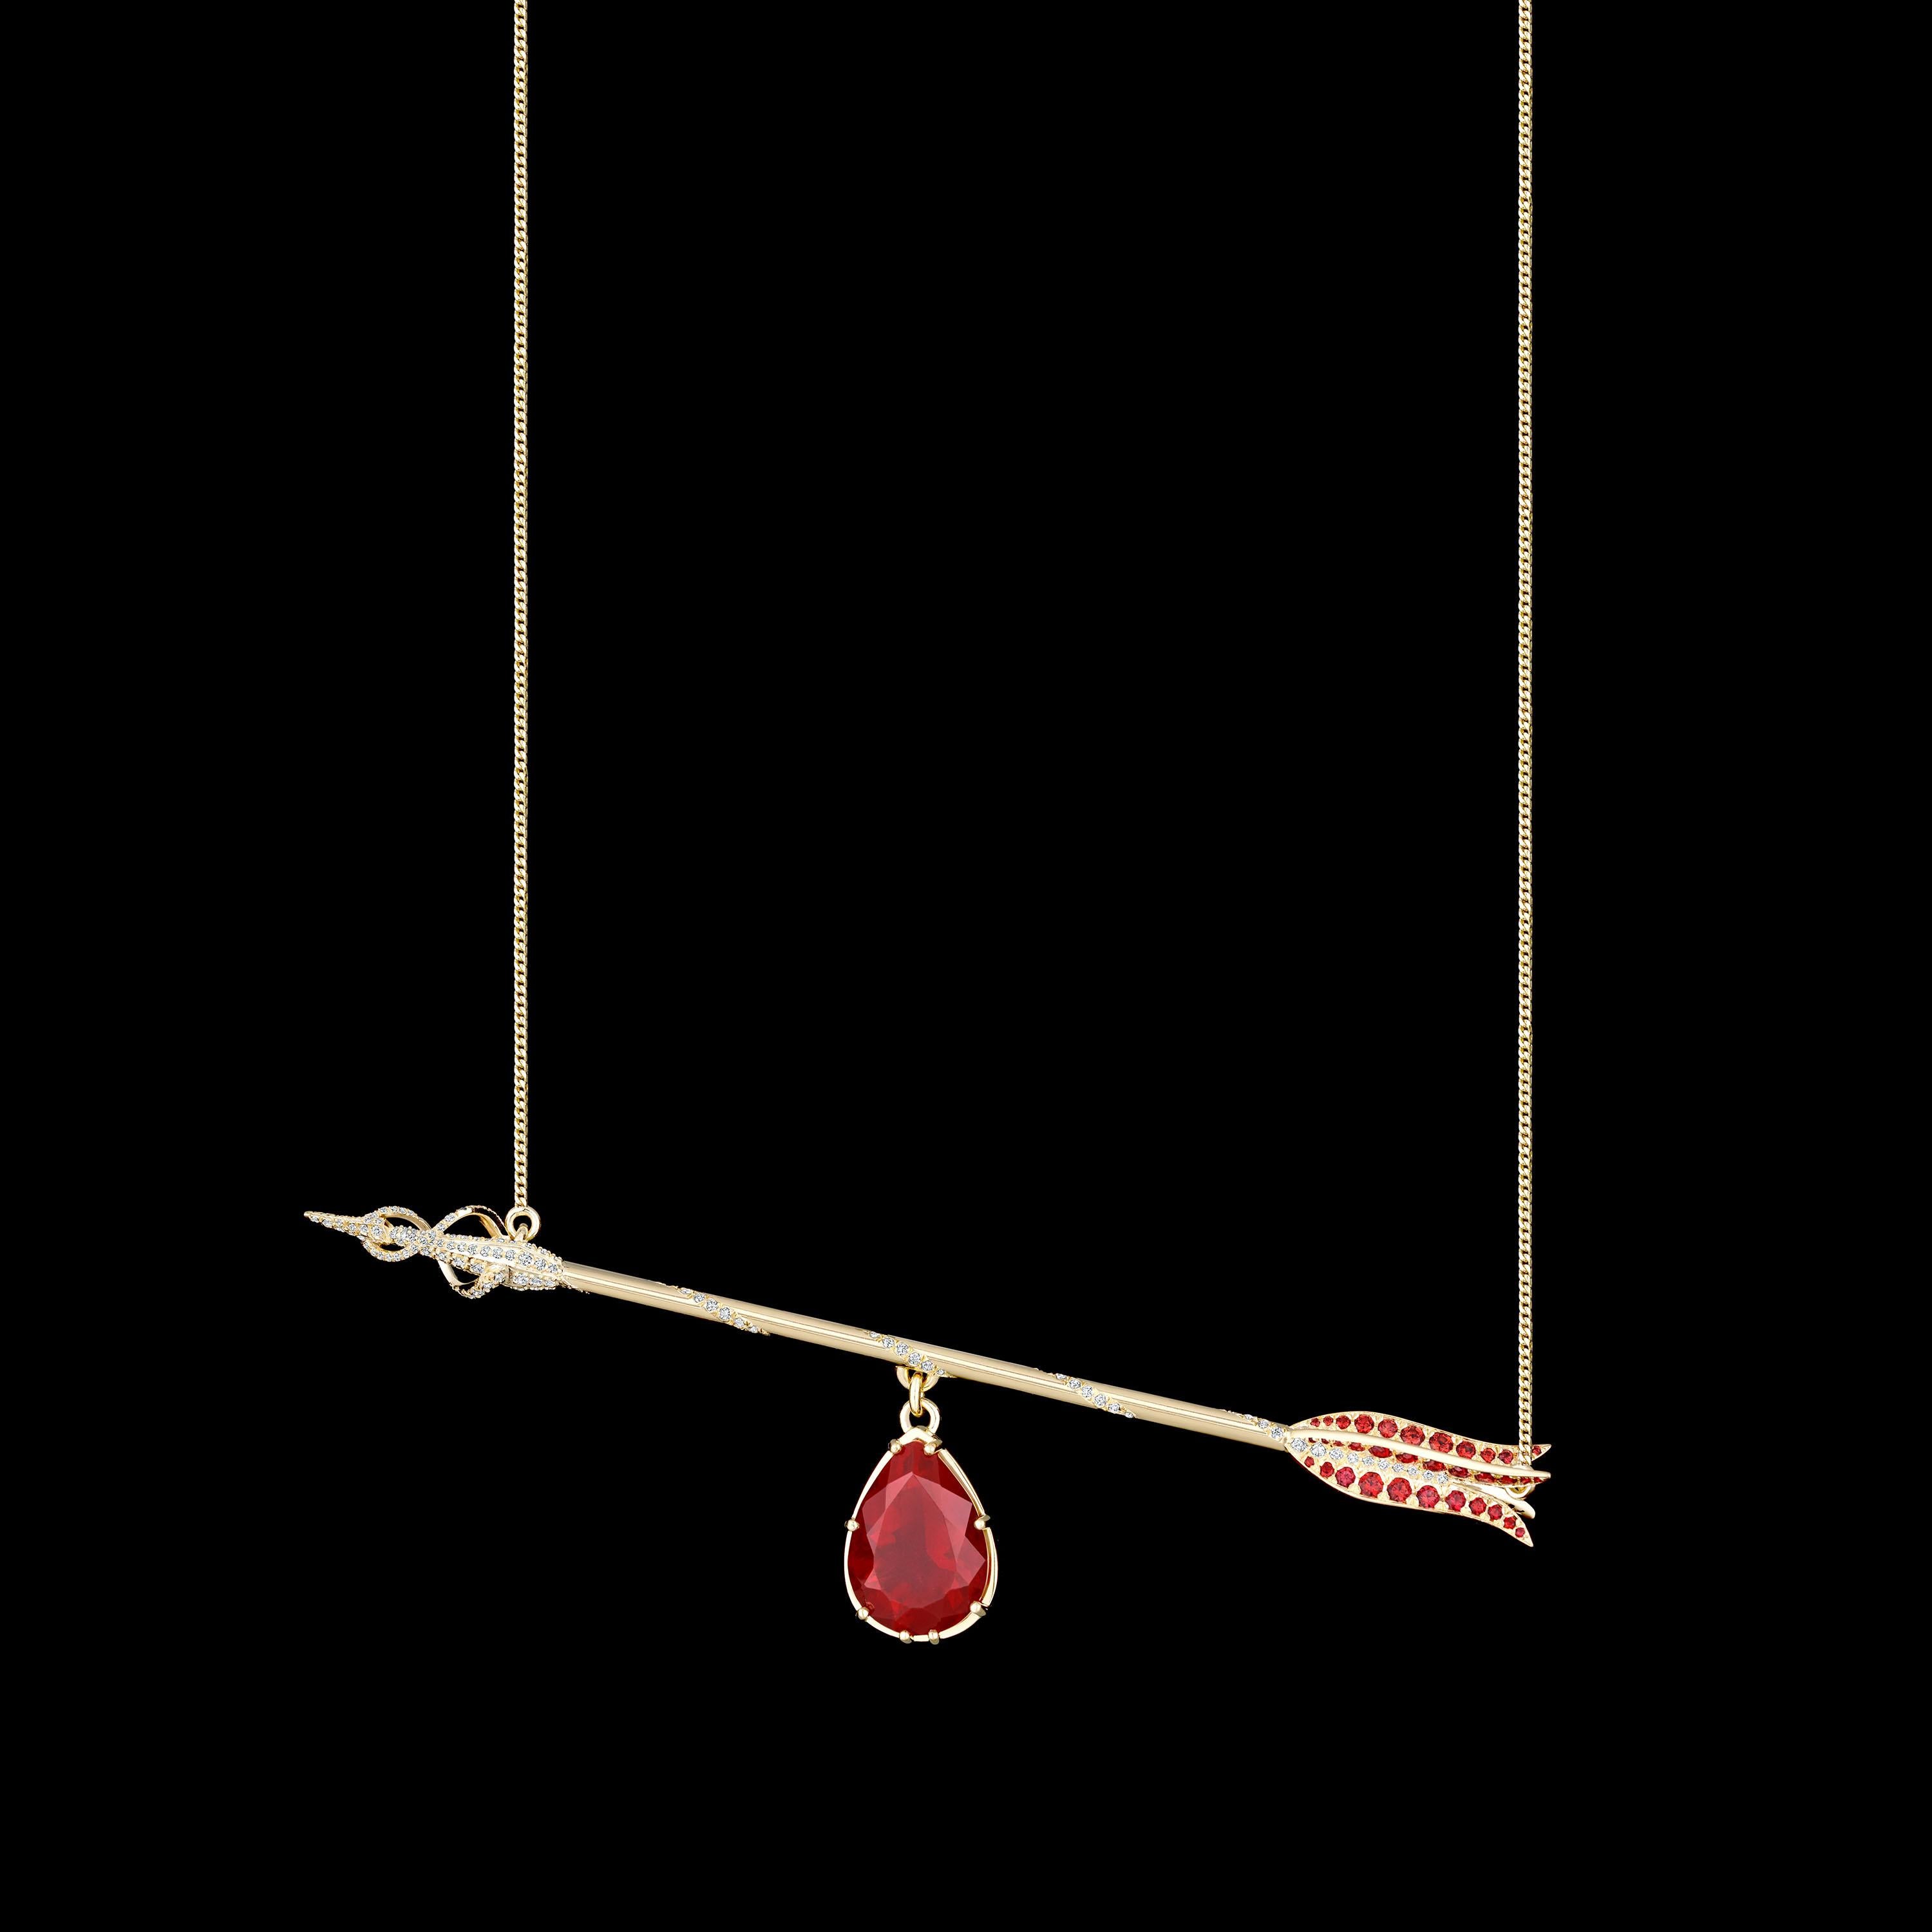 A large pendant in 18K gold with a pear shaped Fire opal (13.5ct), red brilliant cut rubies, and diamonds in the shape of an arrow and a blood drop.

Please note: this was a bespoke, unique creation. We can create another one for you similar but not